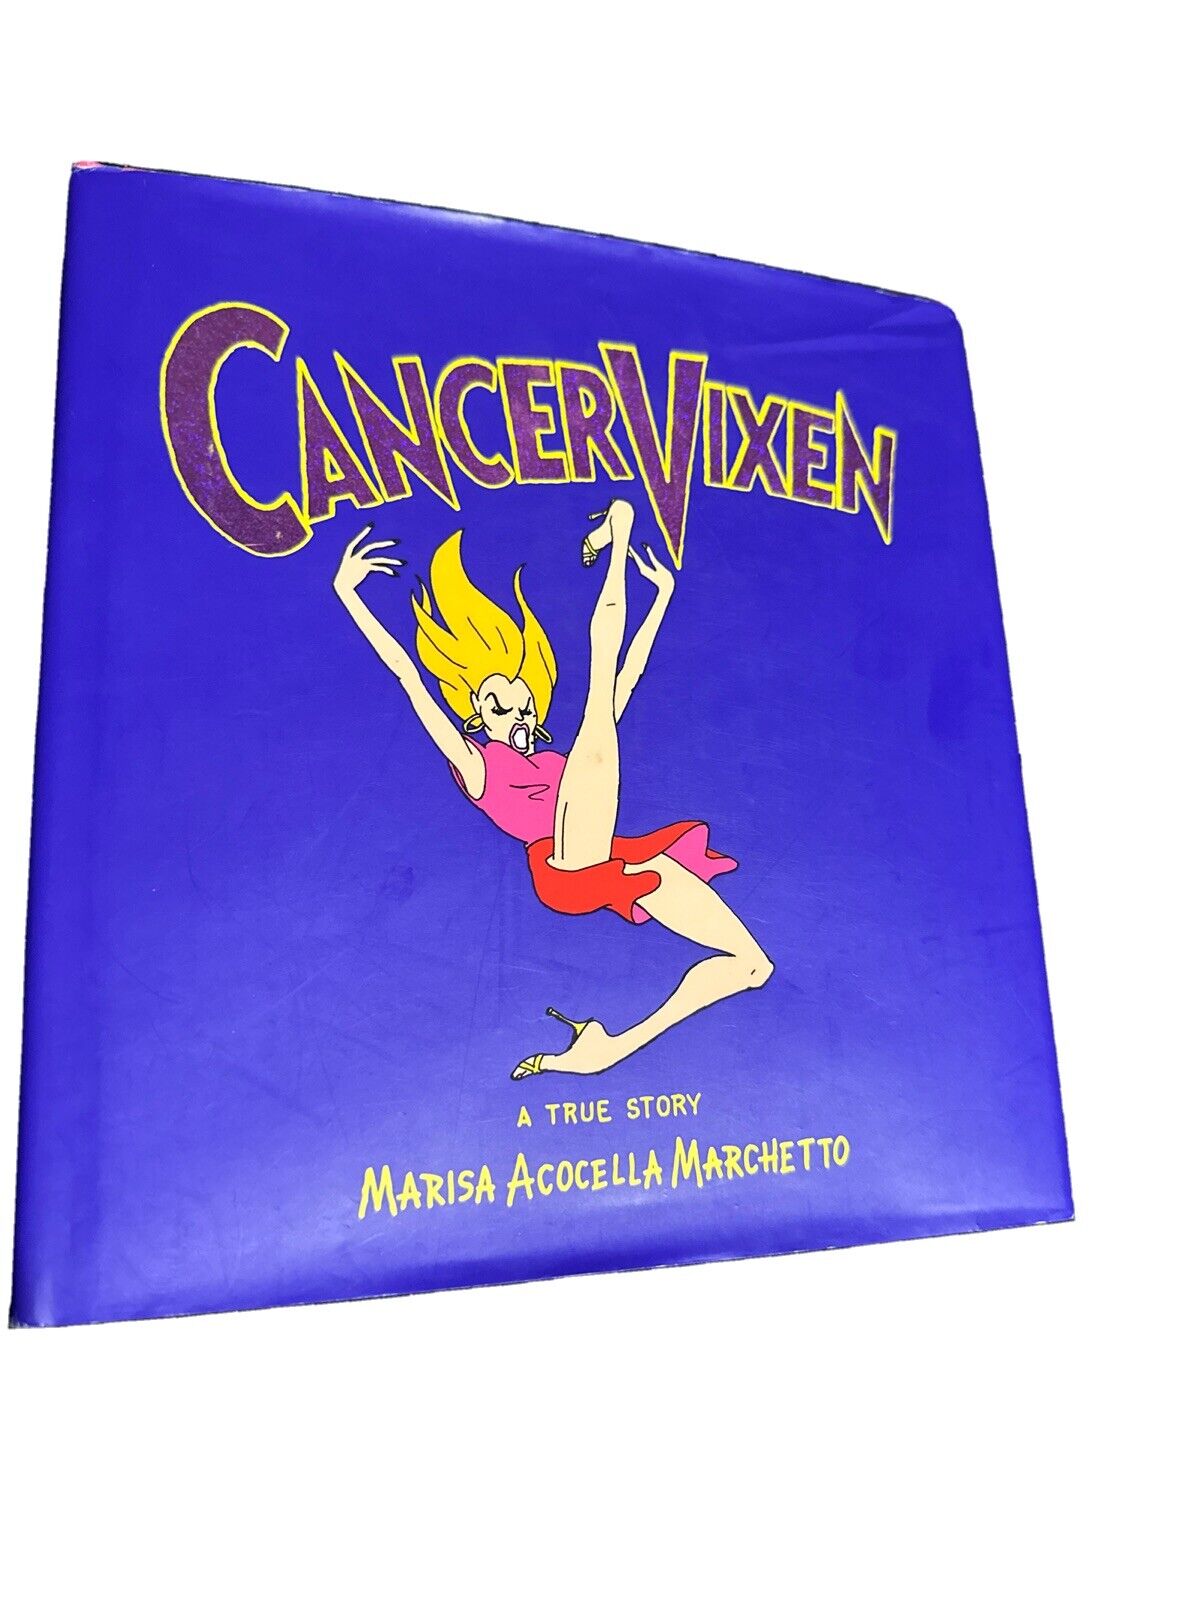 Cancer Vixen (Alfred A. Knopf Publishing, 2006)